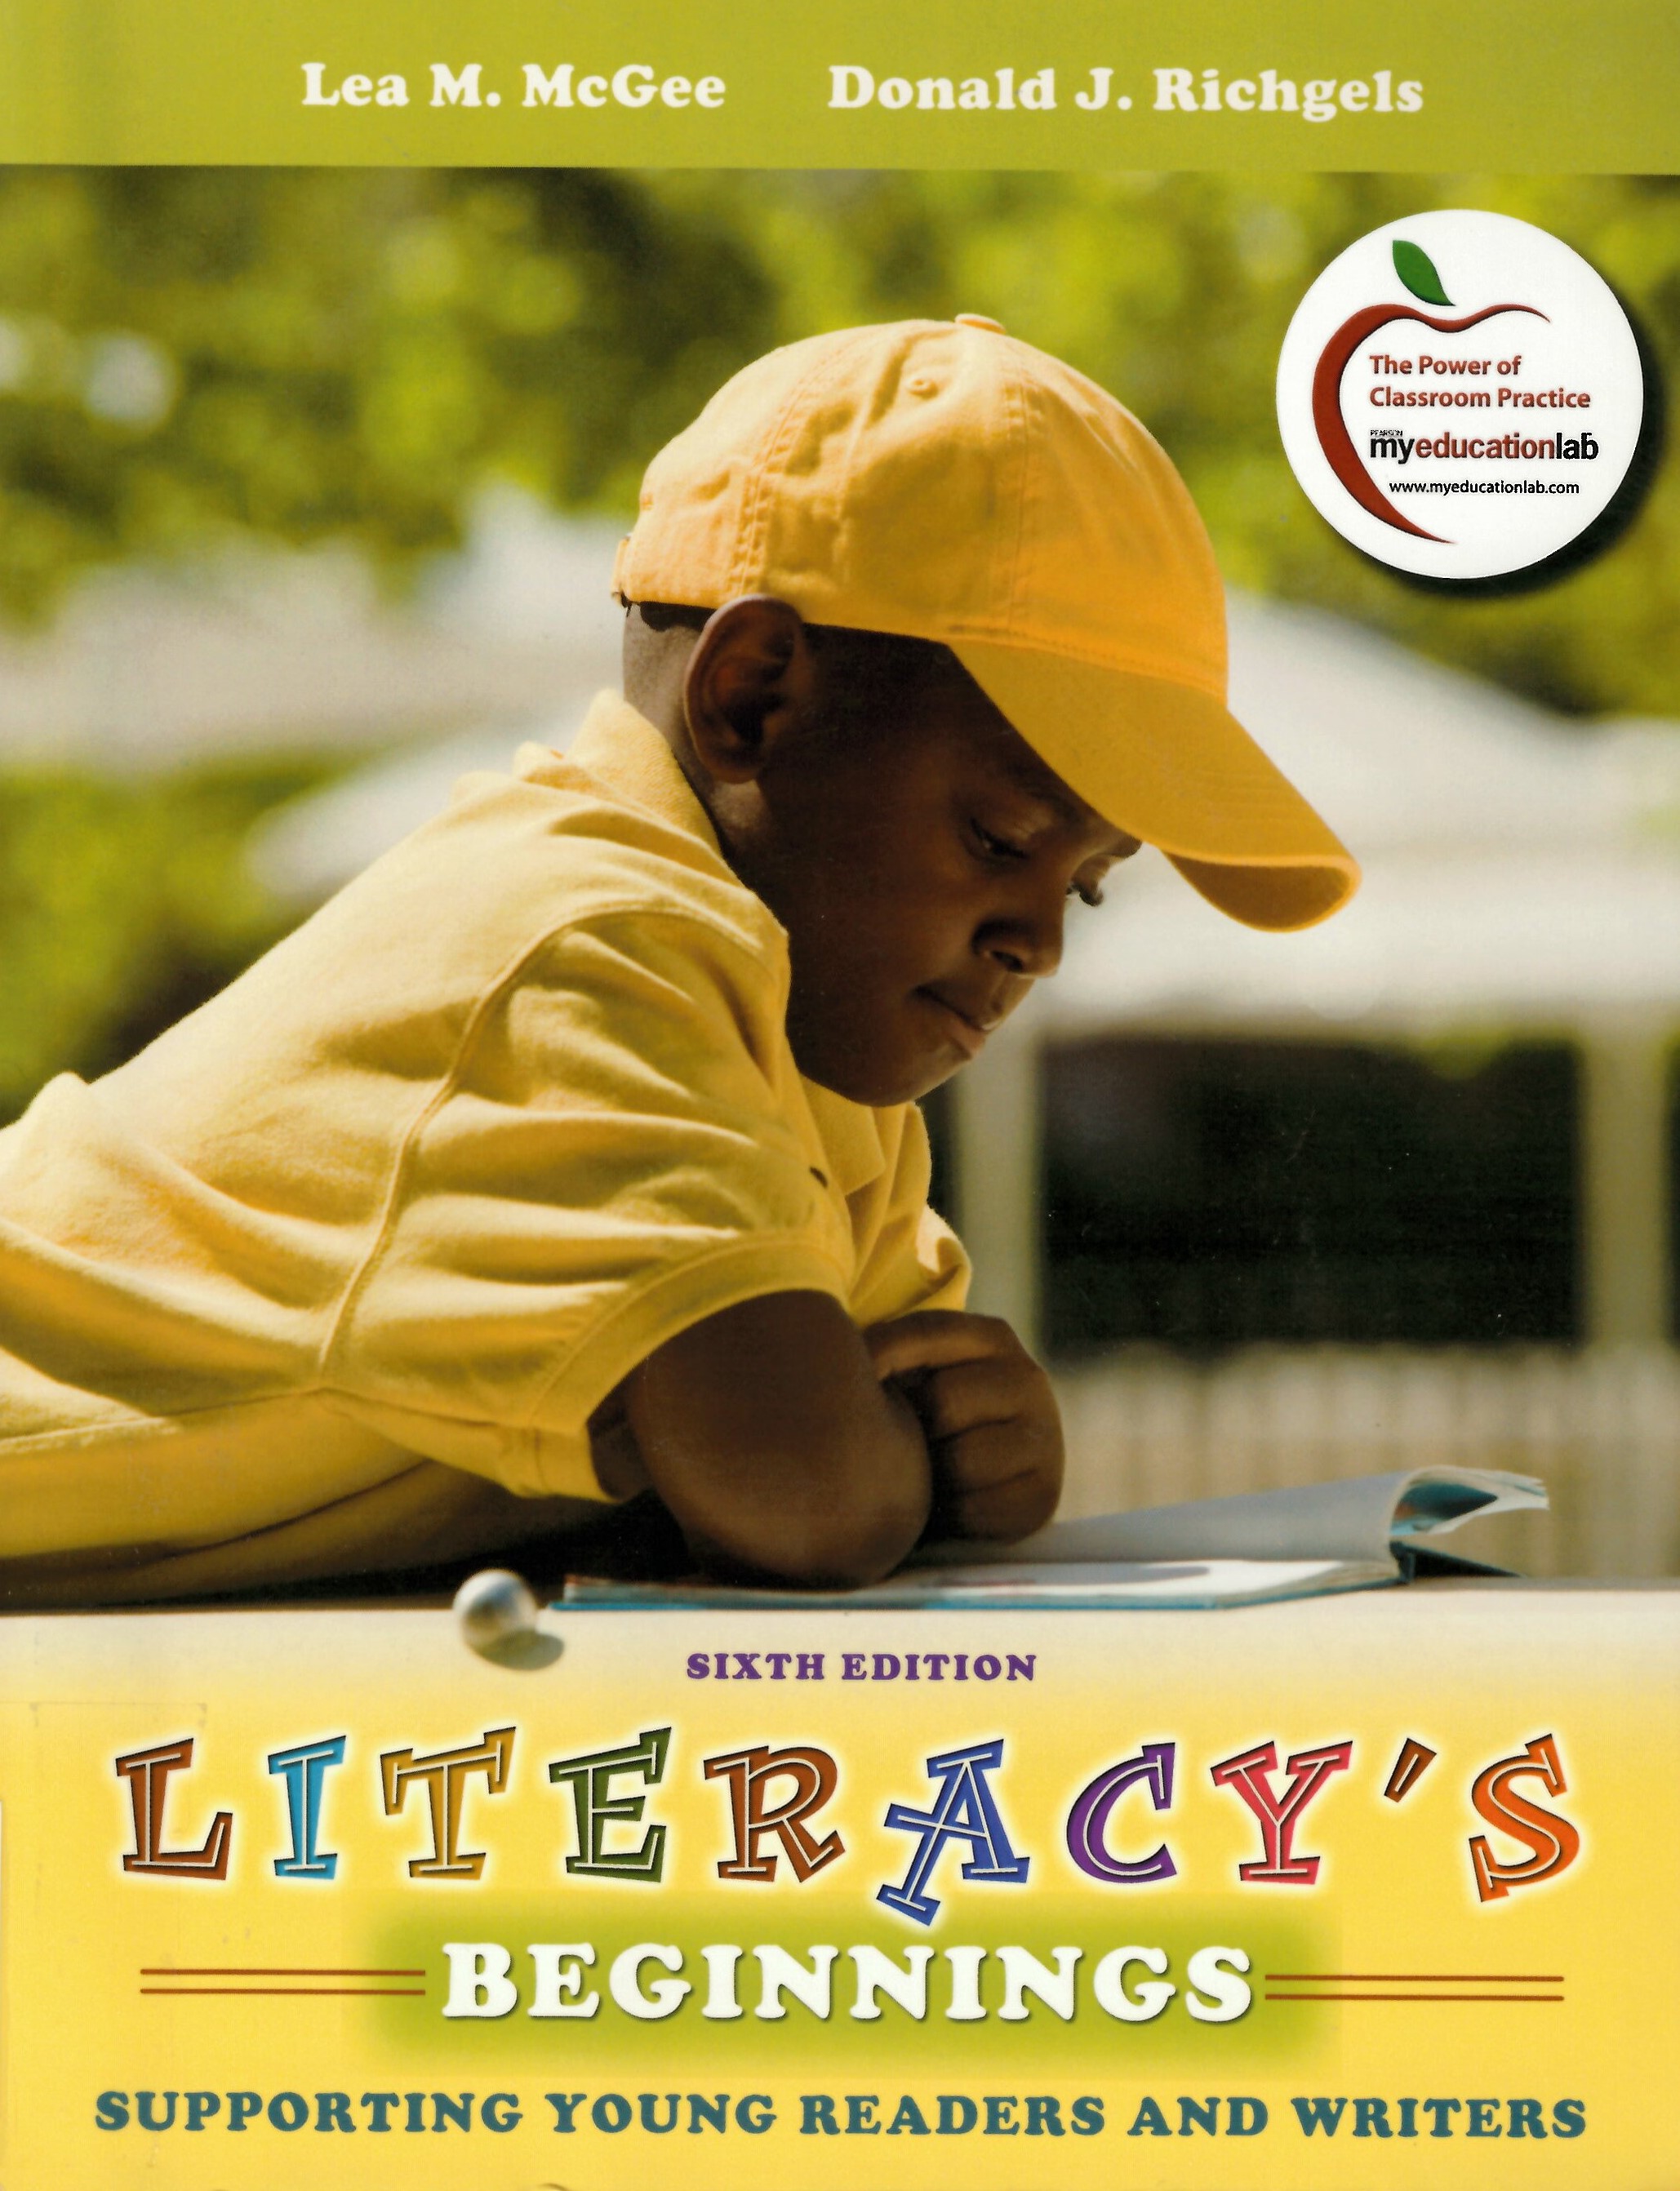 Literacy's beginnings : supporting young readers and writers